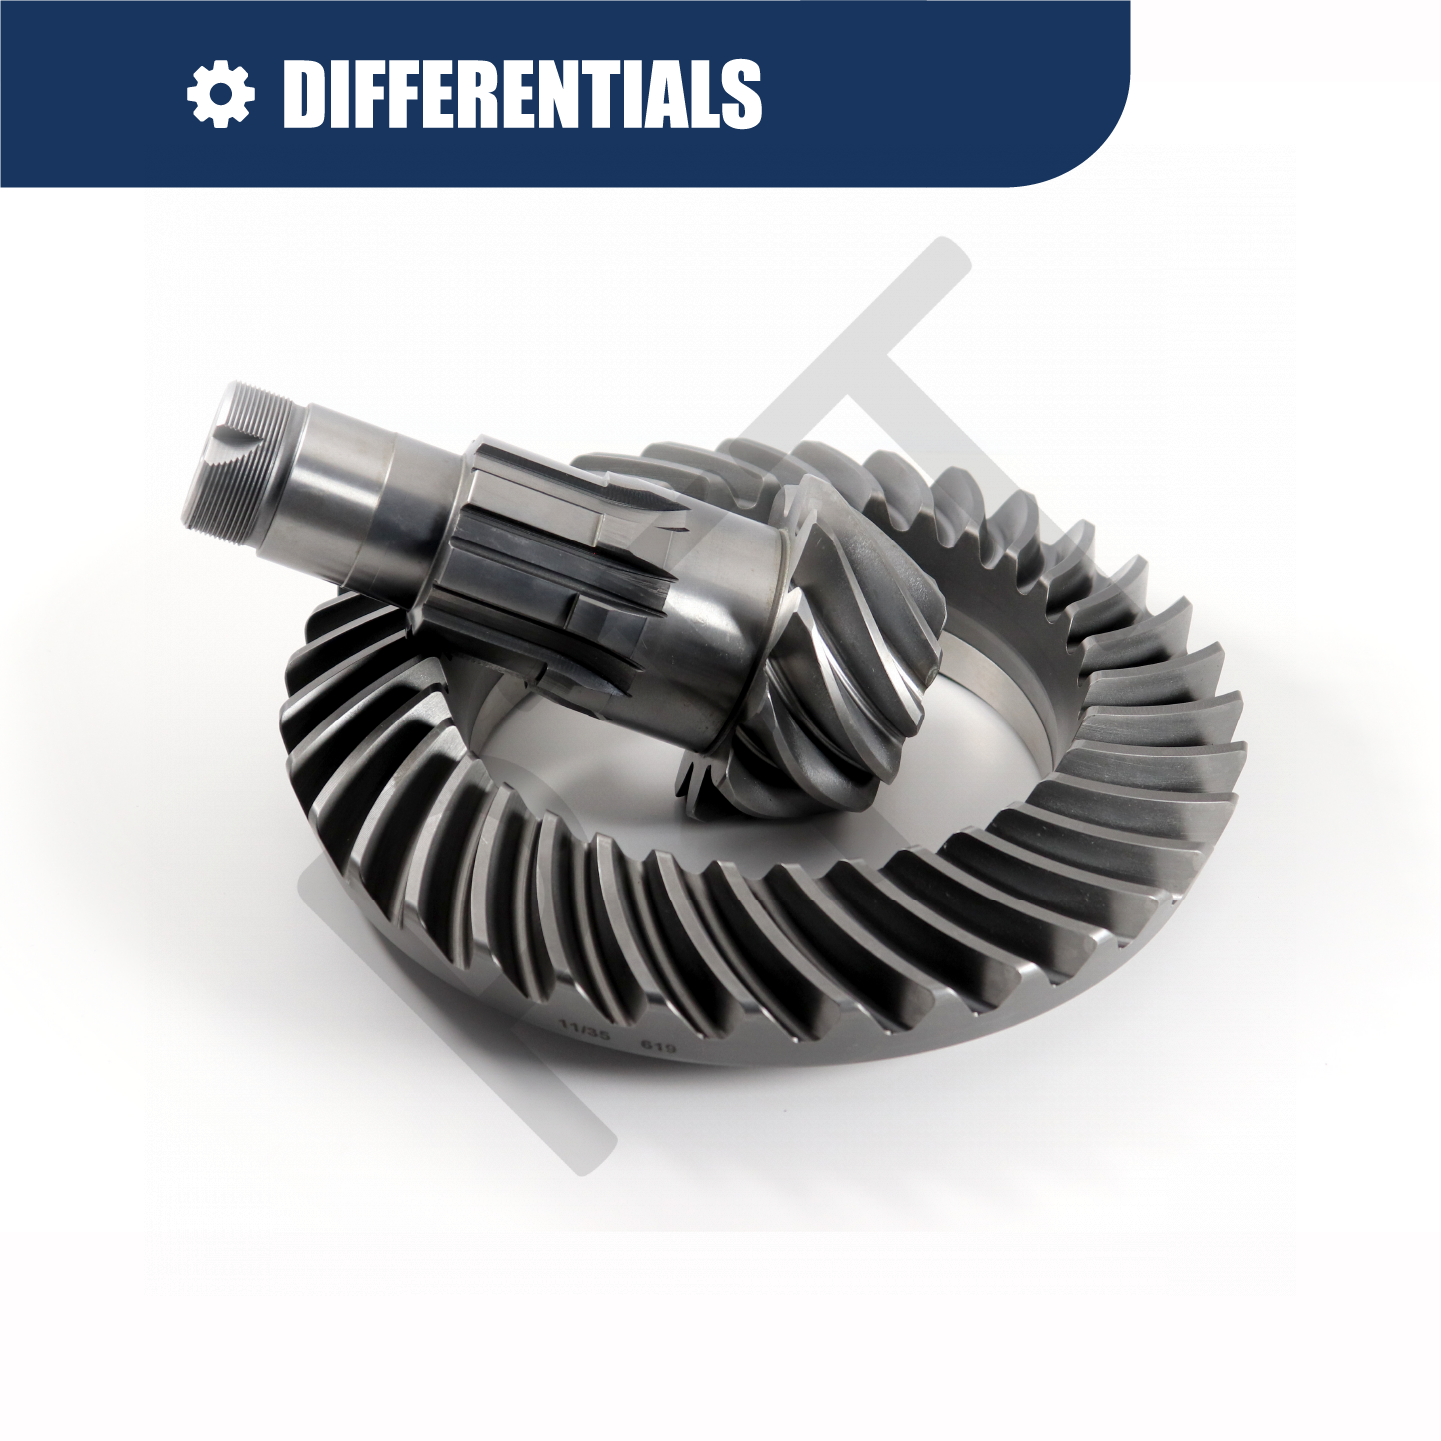 DIFFERENTIALS (WITH BANNER)